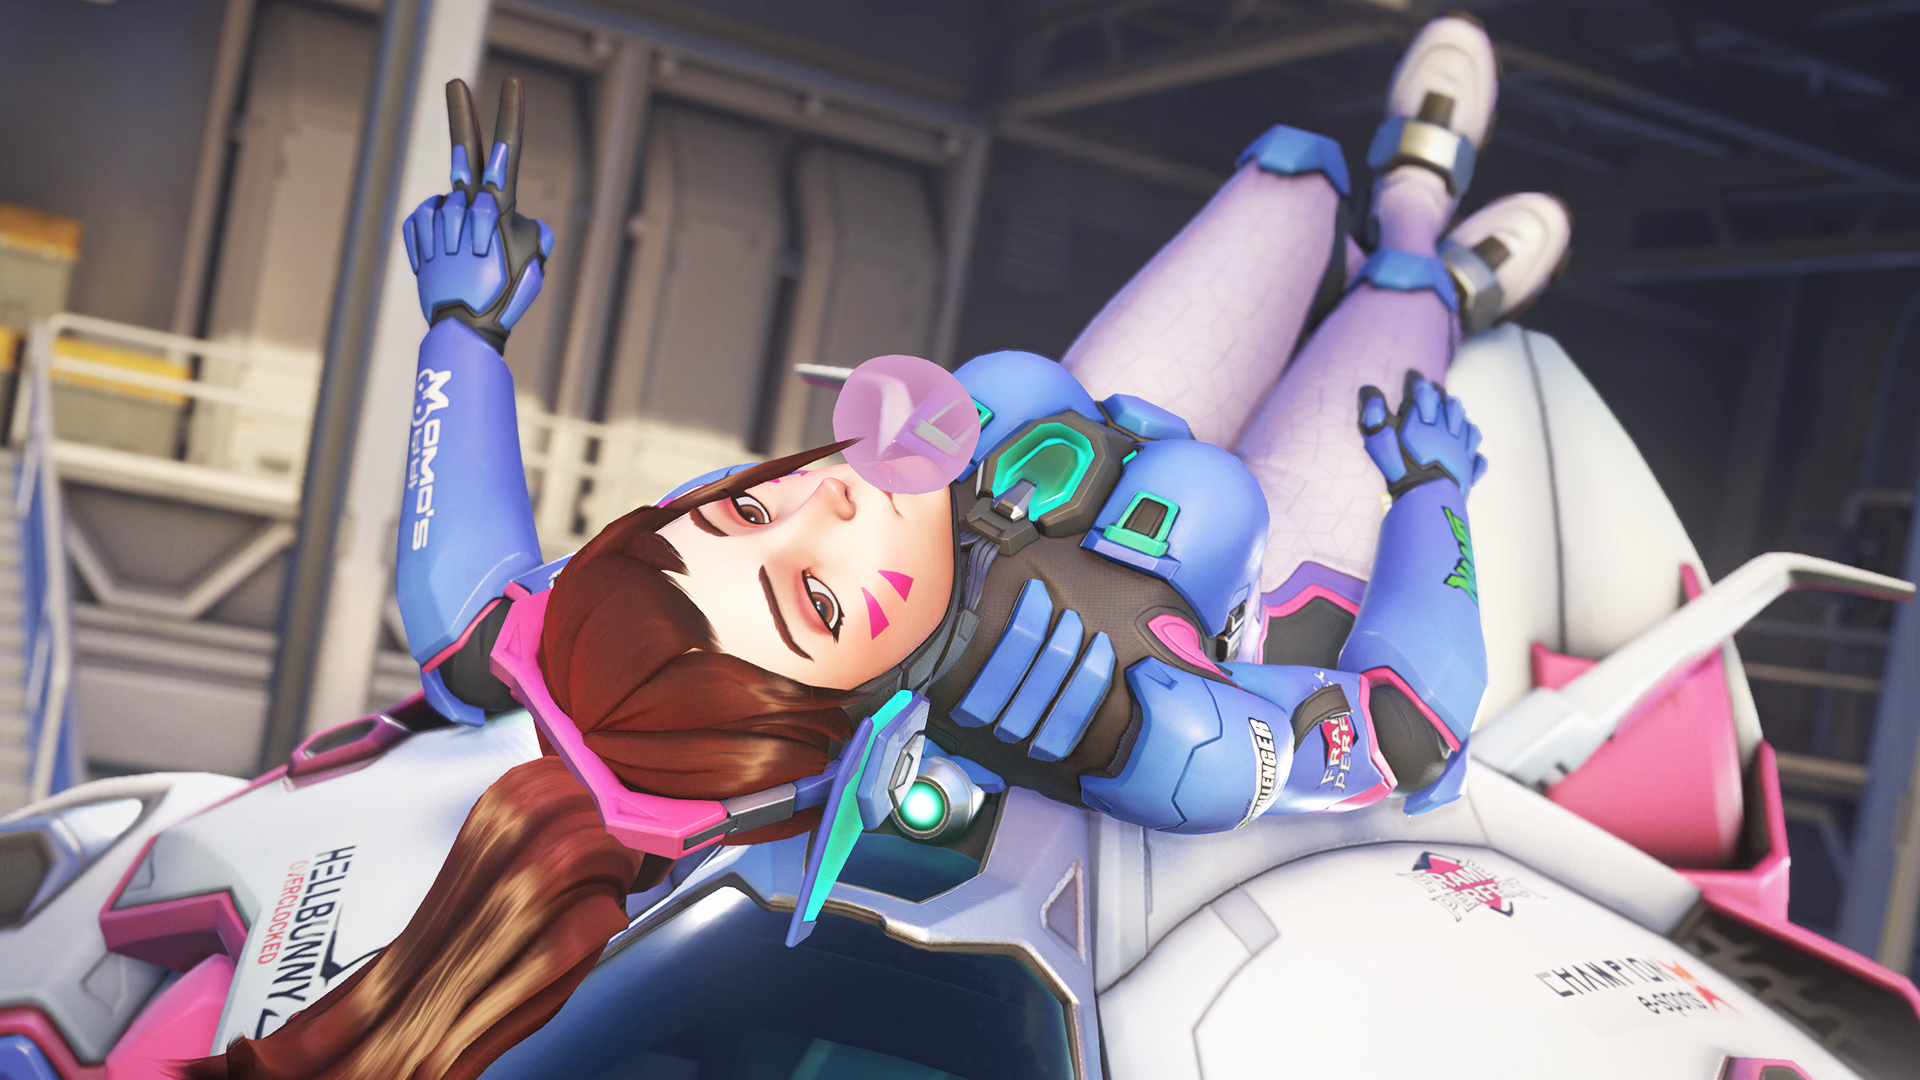 Overwatch 2 Review